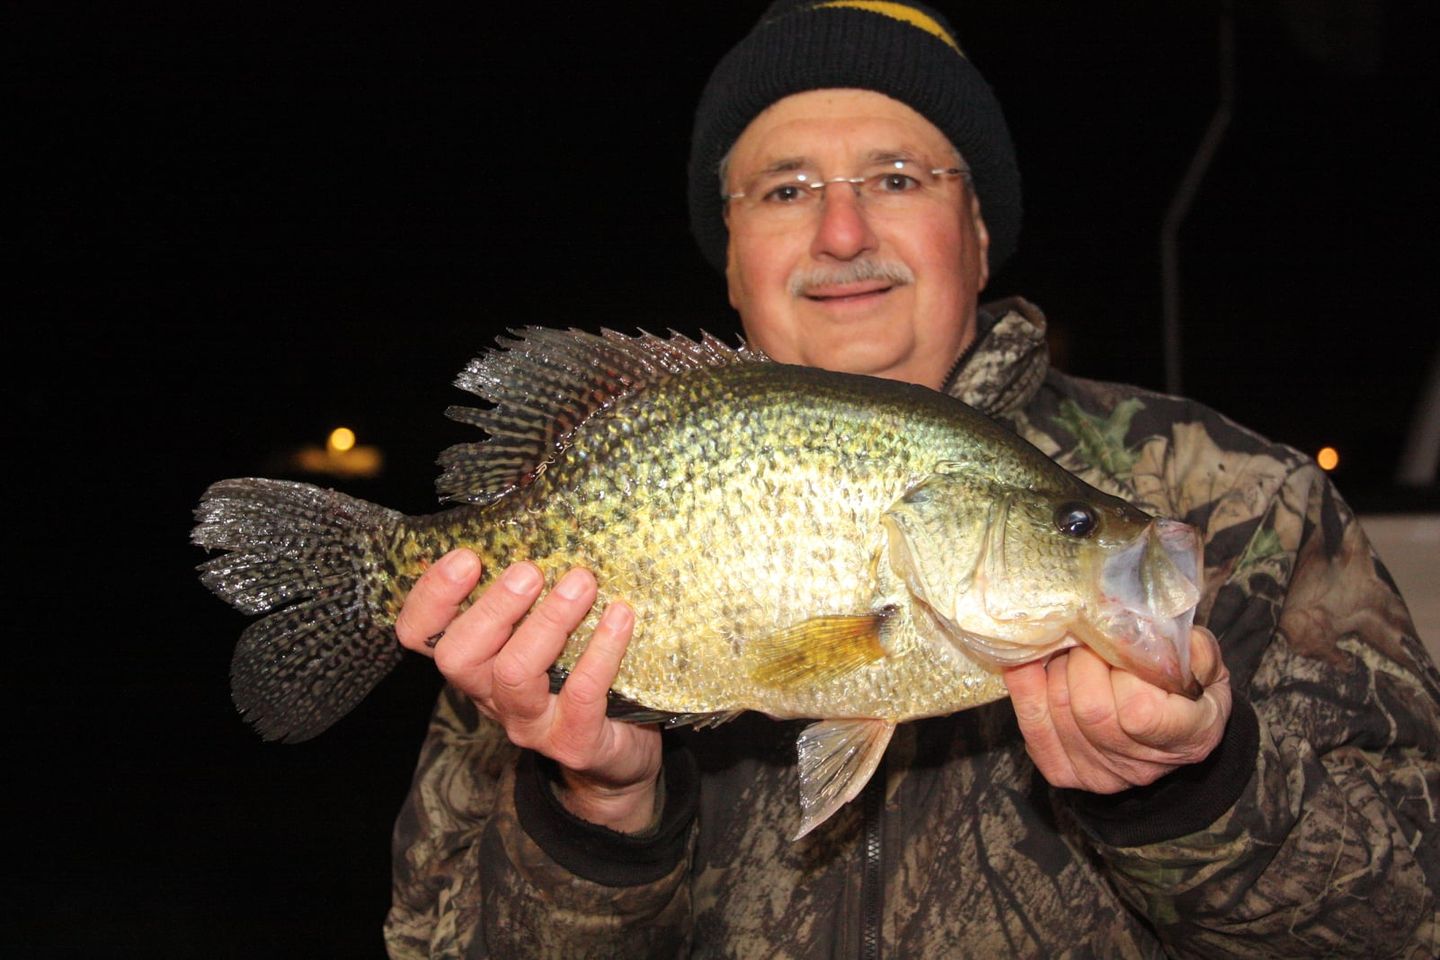 An angler holds up a large crappie.